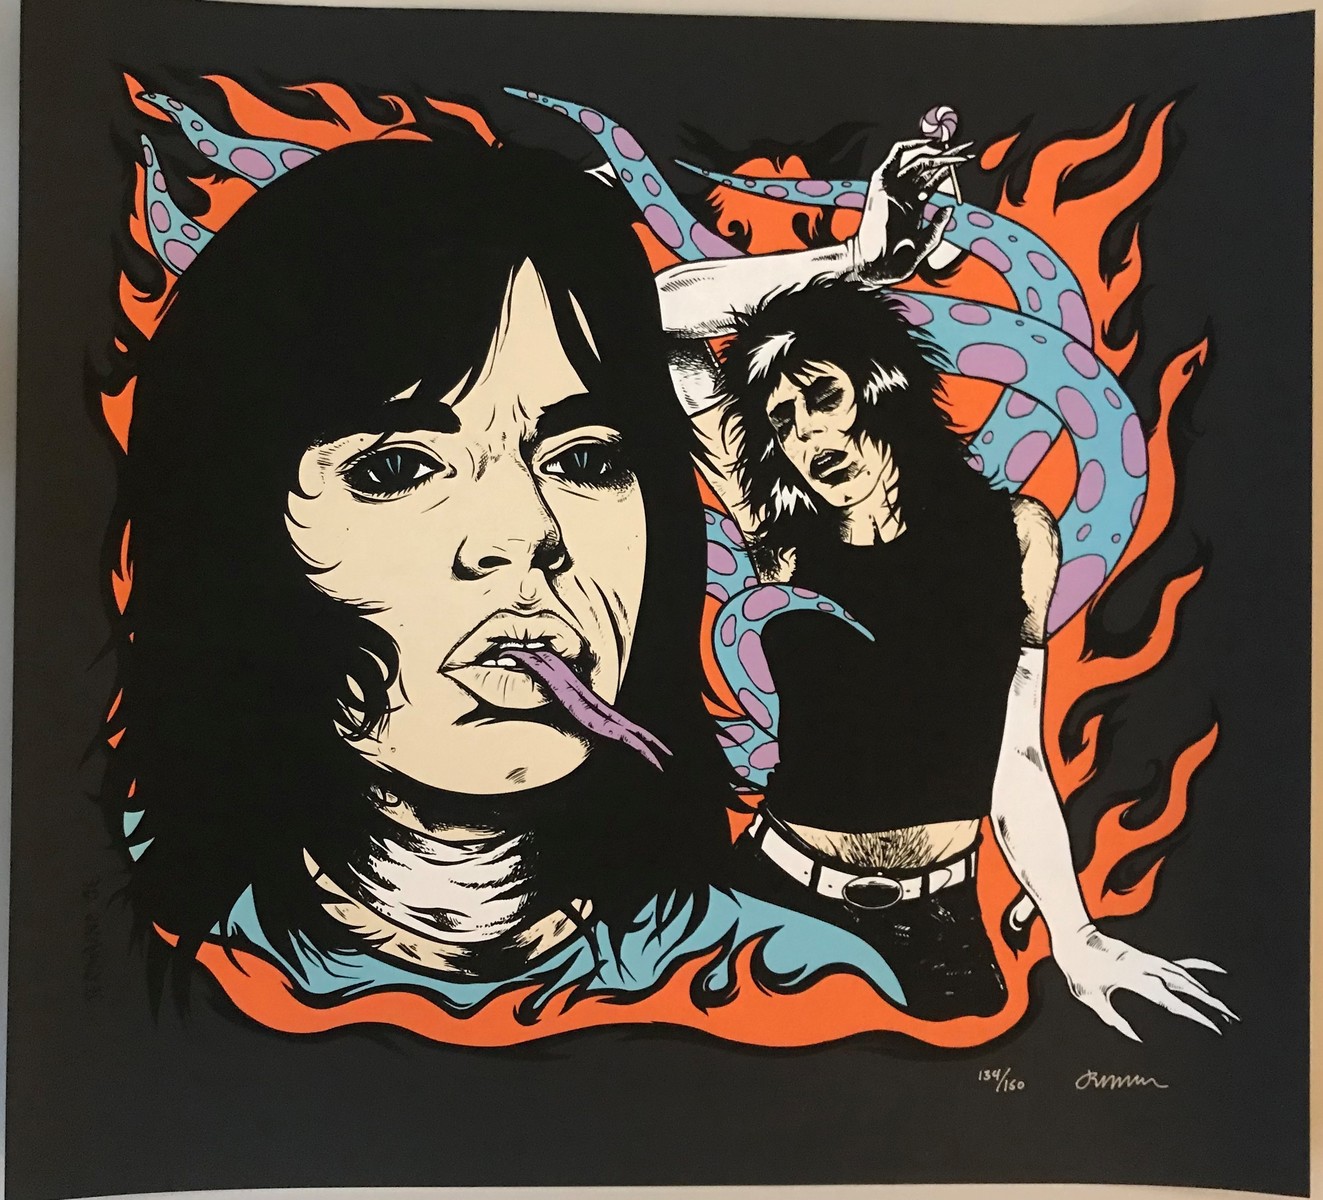 Mick Jagger & Keith Richards – Limited Edition Art Print by Jermaine Rogers